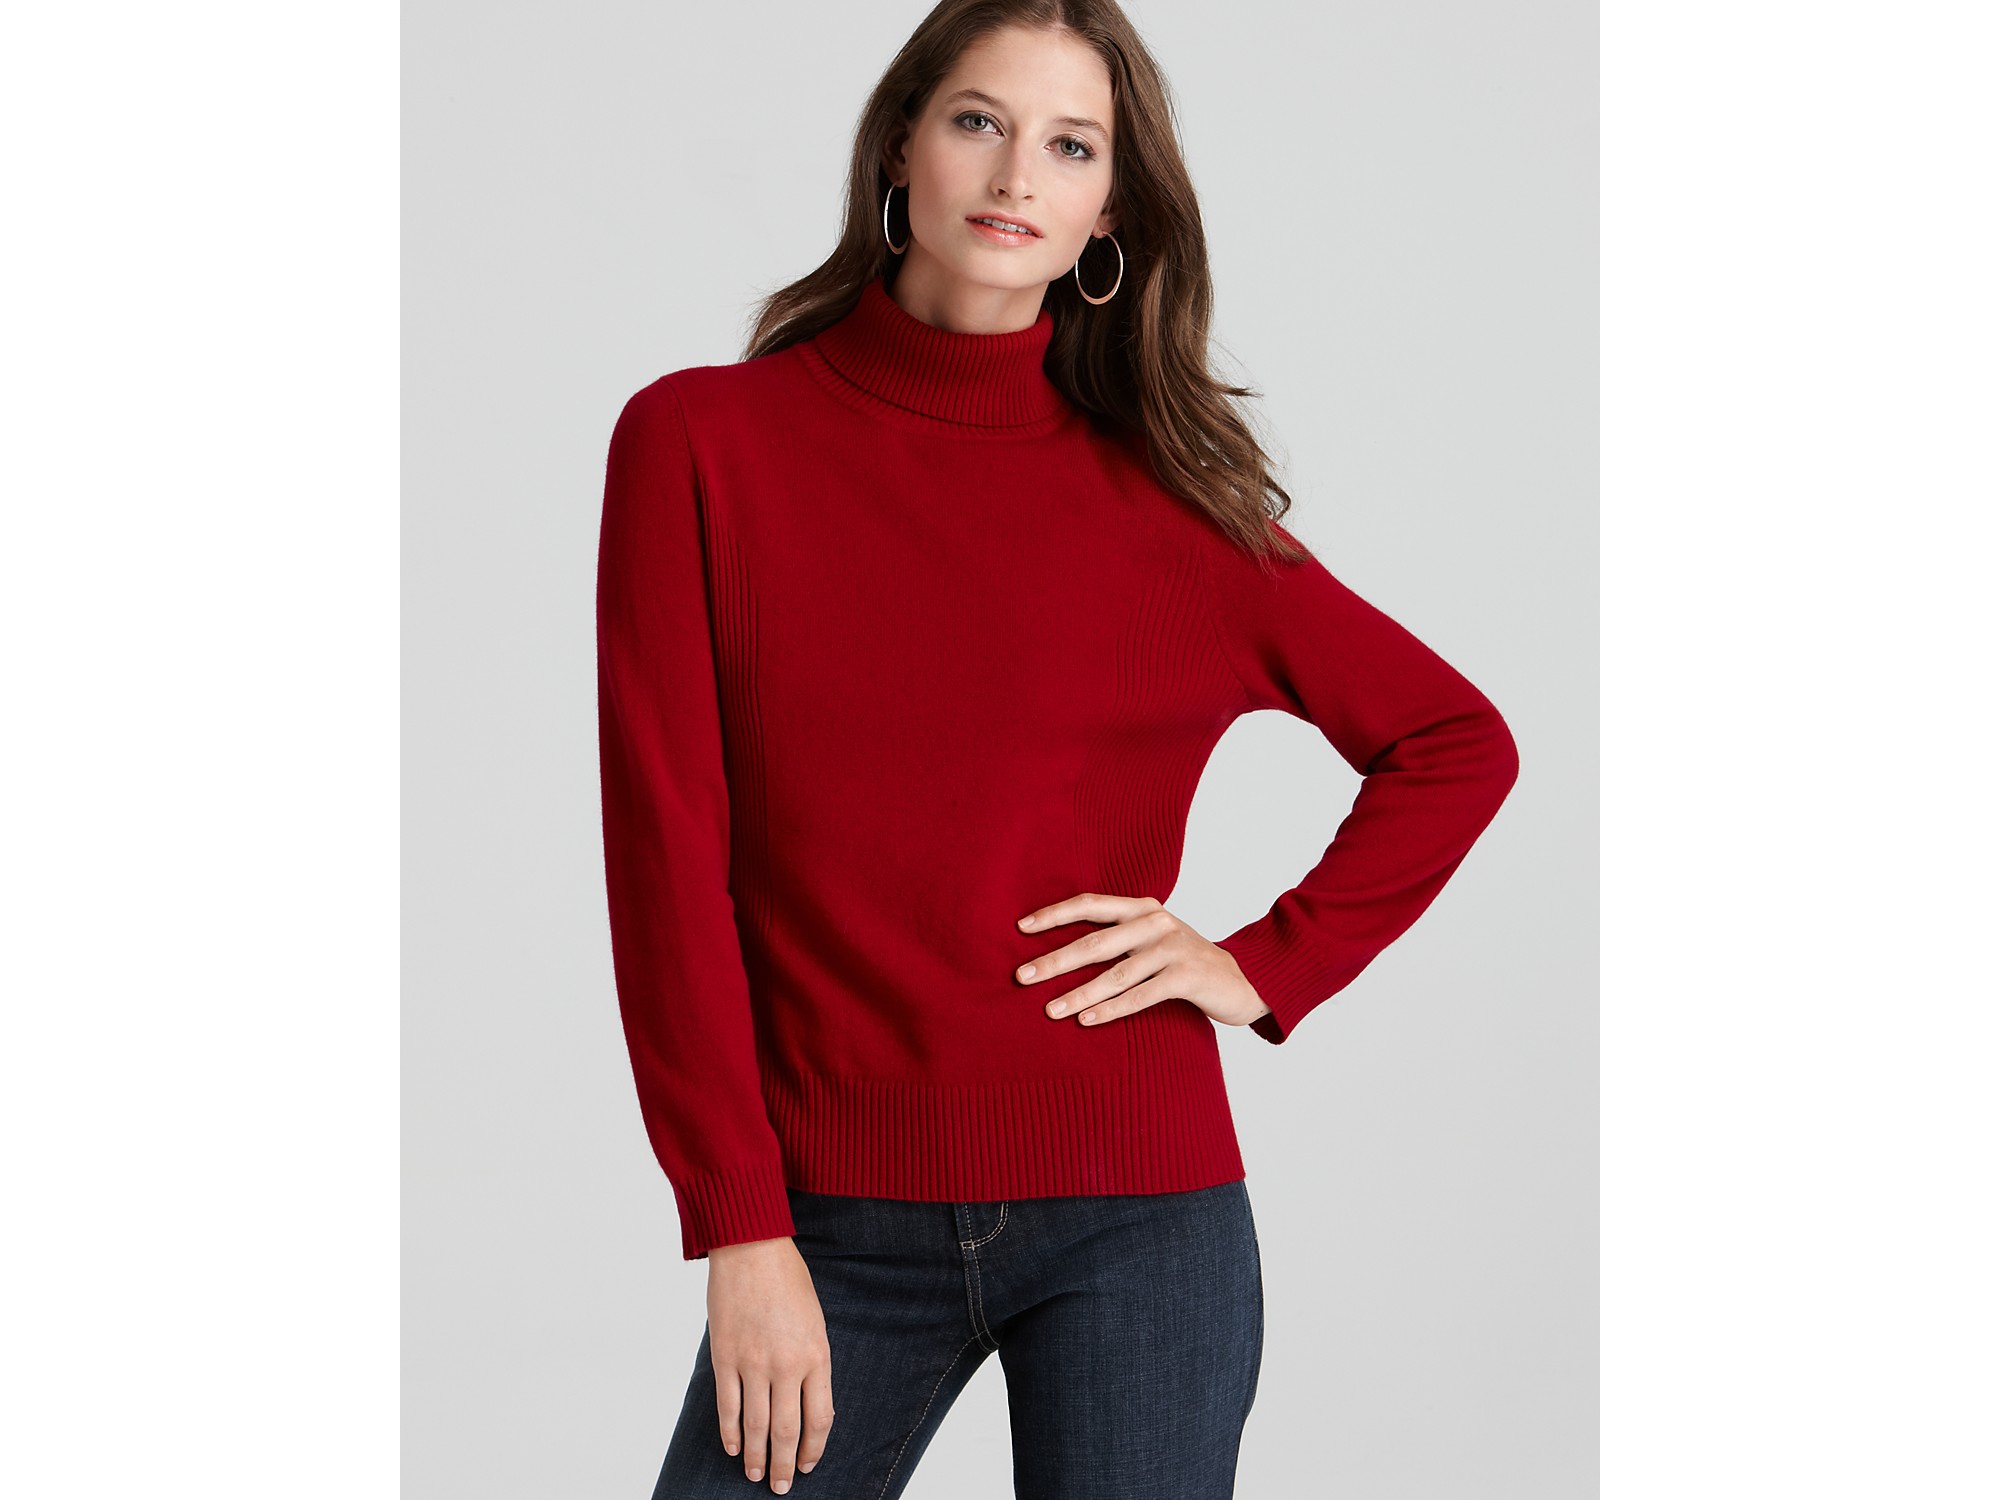 Lyst - Ash Jones New York Collection Cashmere Turtleneck Sweater in Red